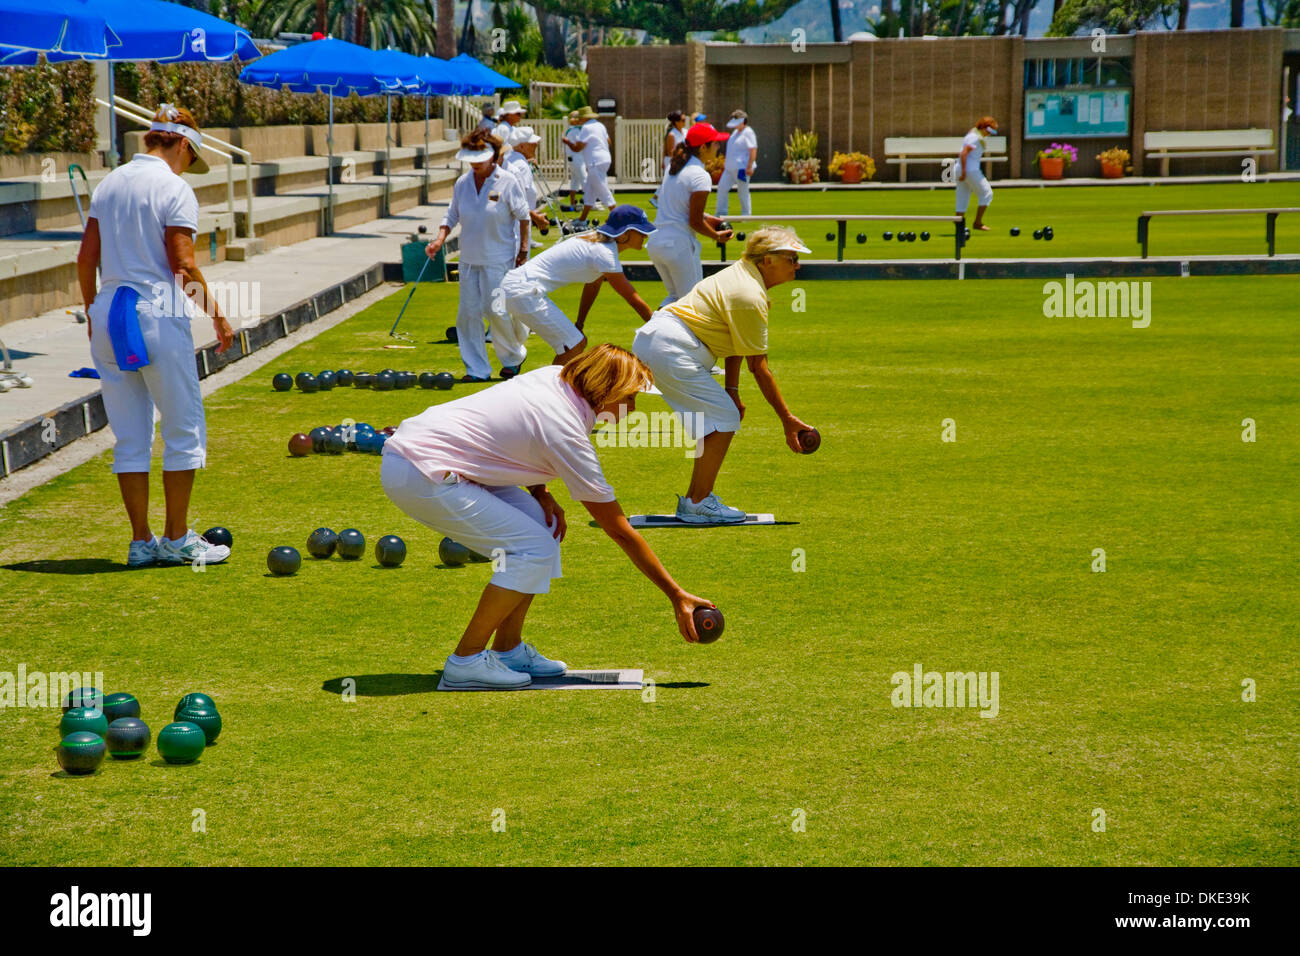 Jul 30, 2007 - Laguna Beach, CA, USA - Two female players prepare to roll an asymmetrical 'bowl' (ball) during a lawn bowling competition on a bowling green in Laguna Beach, CA.The object of the game is to roll bowls as close to a previously-rolled 'jack' ball as possible without touching it. (Credit Image: © Spencer Grant/ZUMA Press) Stock Photo